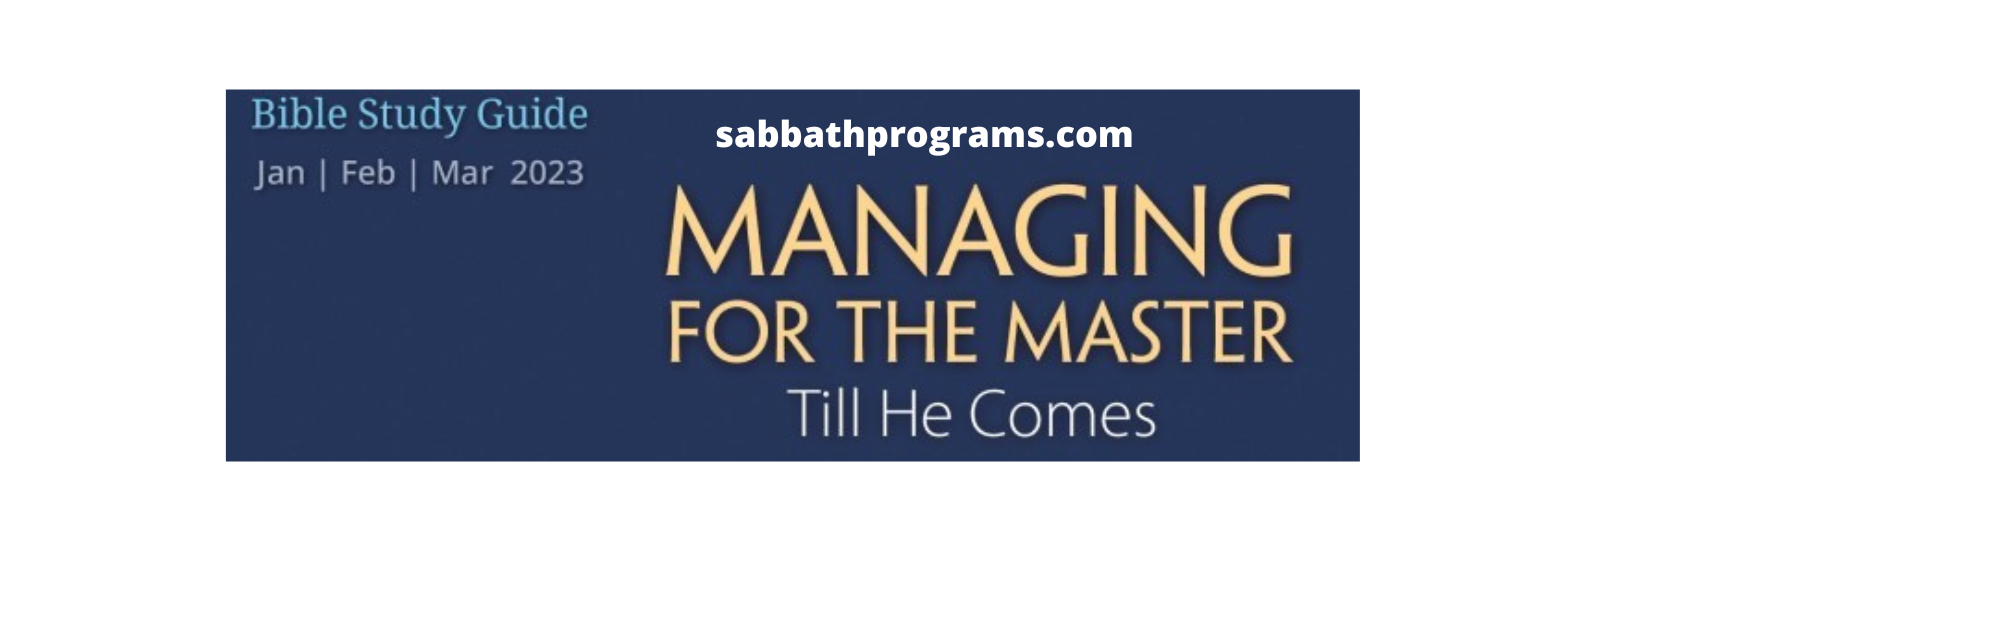 Managing for the Master: Till He Comes